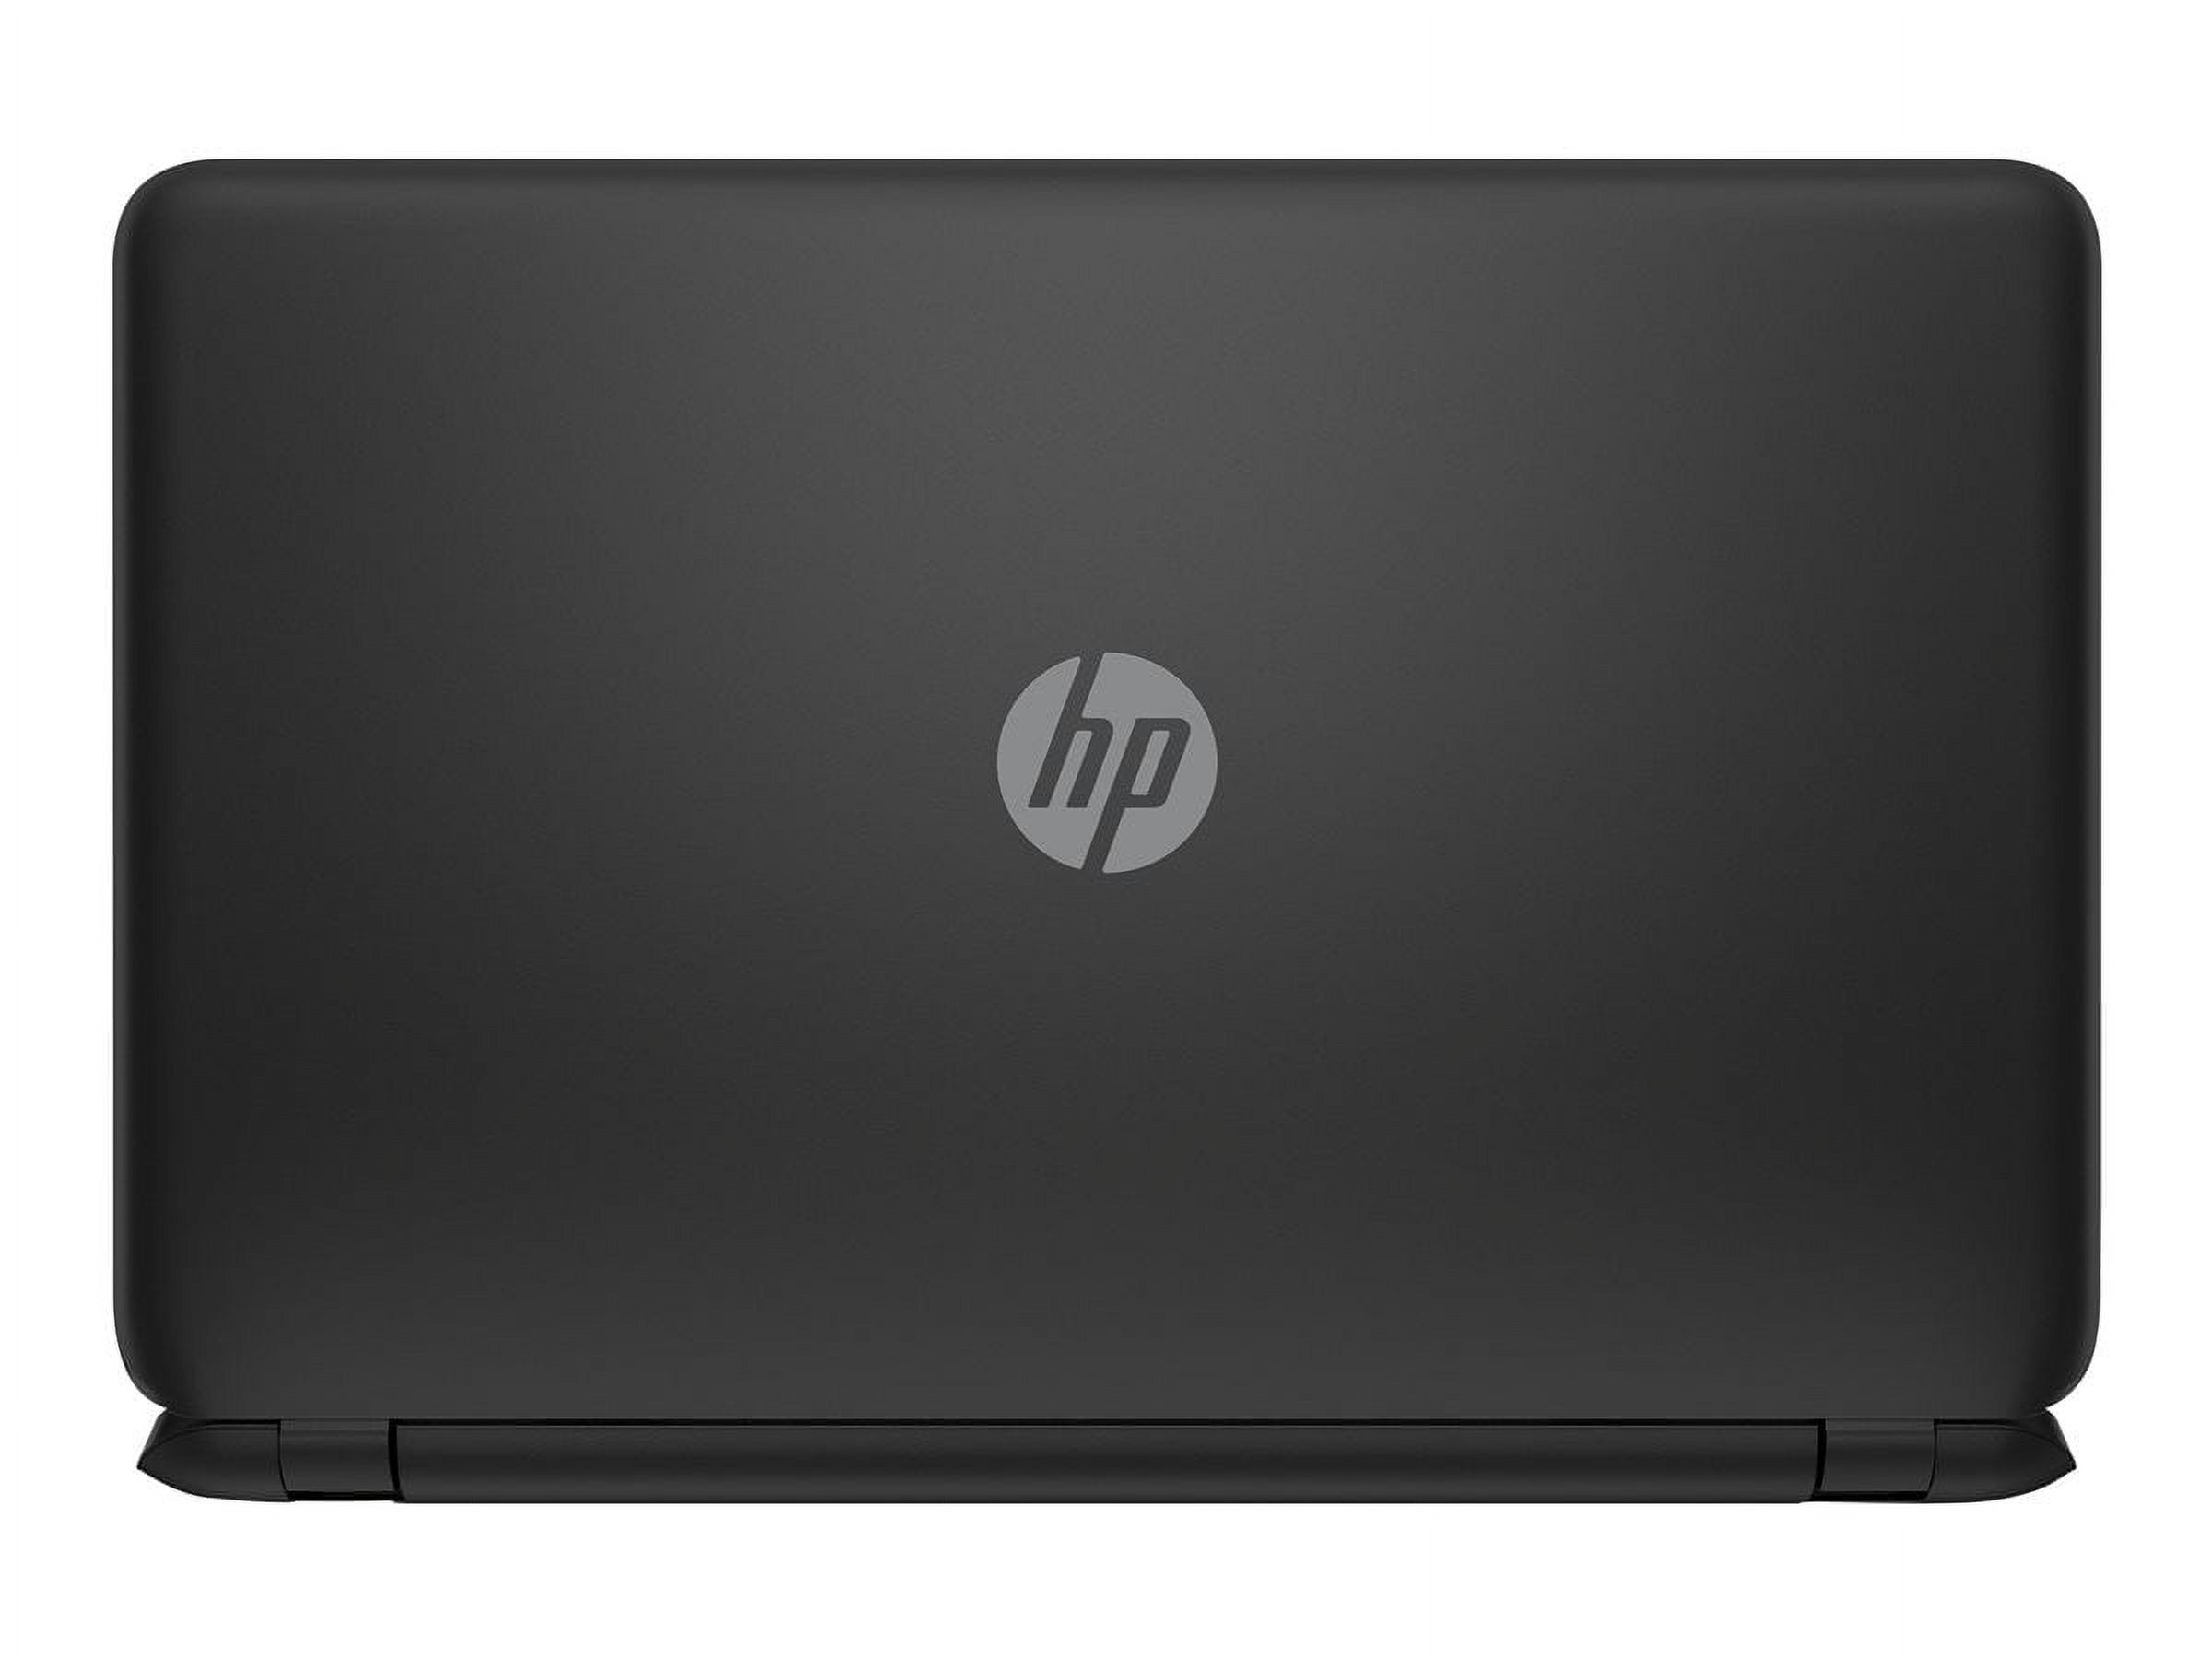 HP Black Licorice 15.6" 15-F387WM Laptop PC with AMD A8-7410 Processor, 4GB Memory, touch screen, 500GB Hard Drive and Windows 10 Home - image 4 of 41